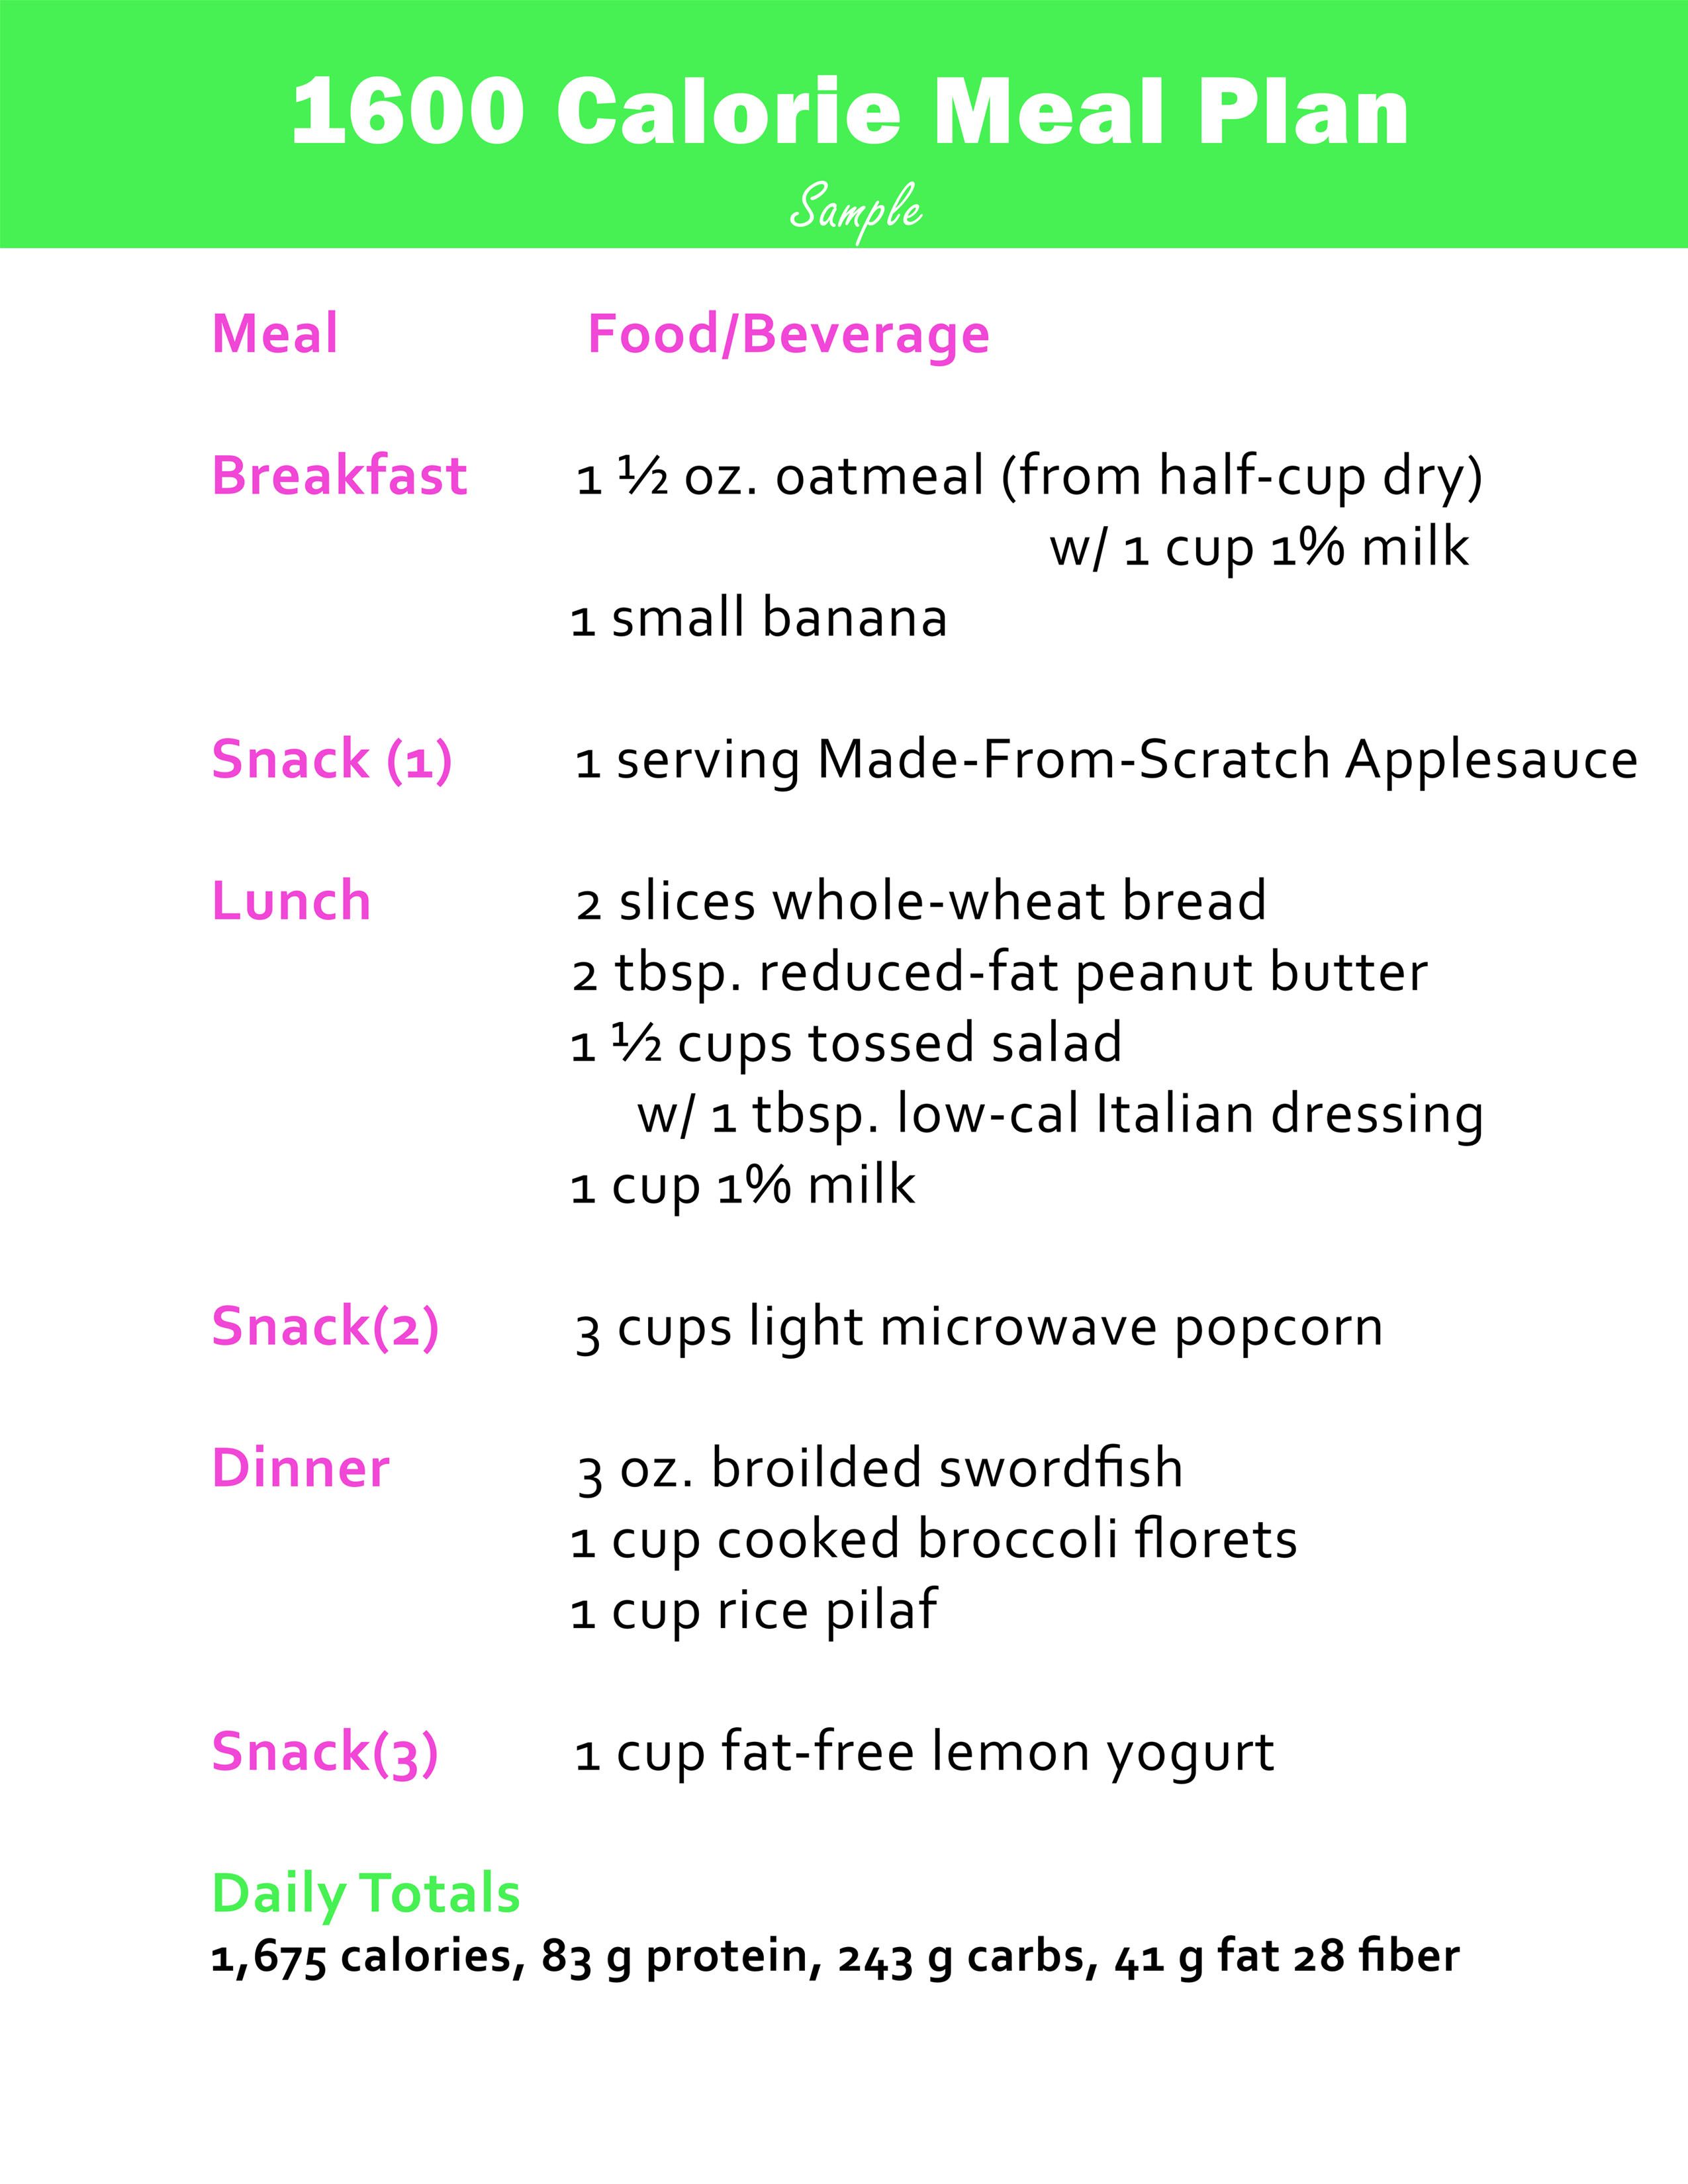 anorexia inpatient meal plan example